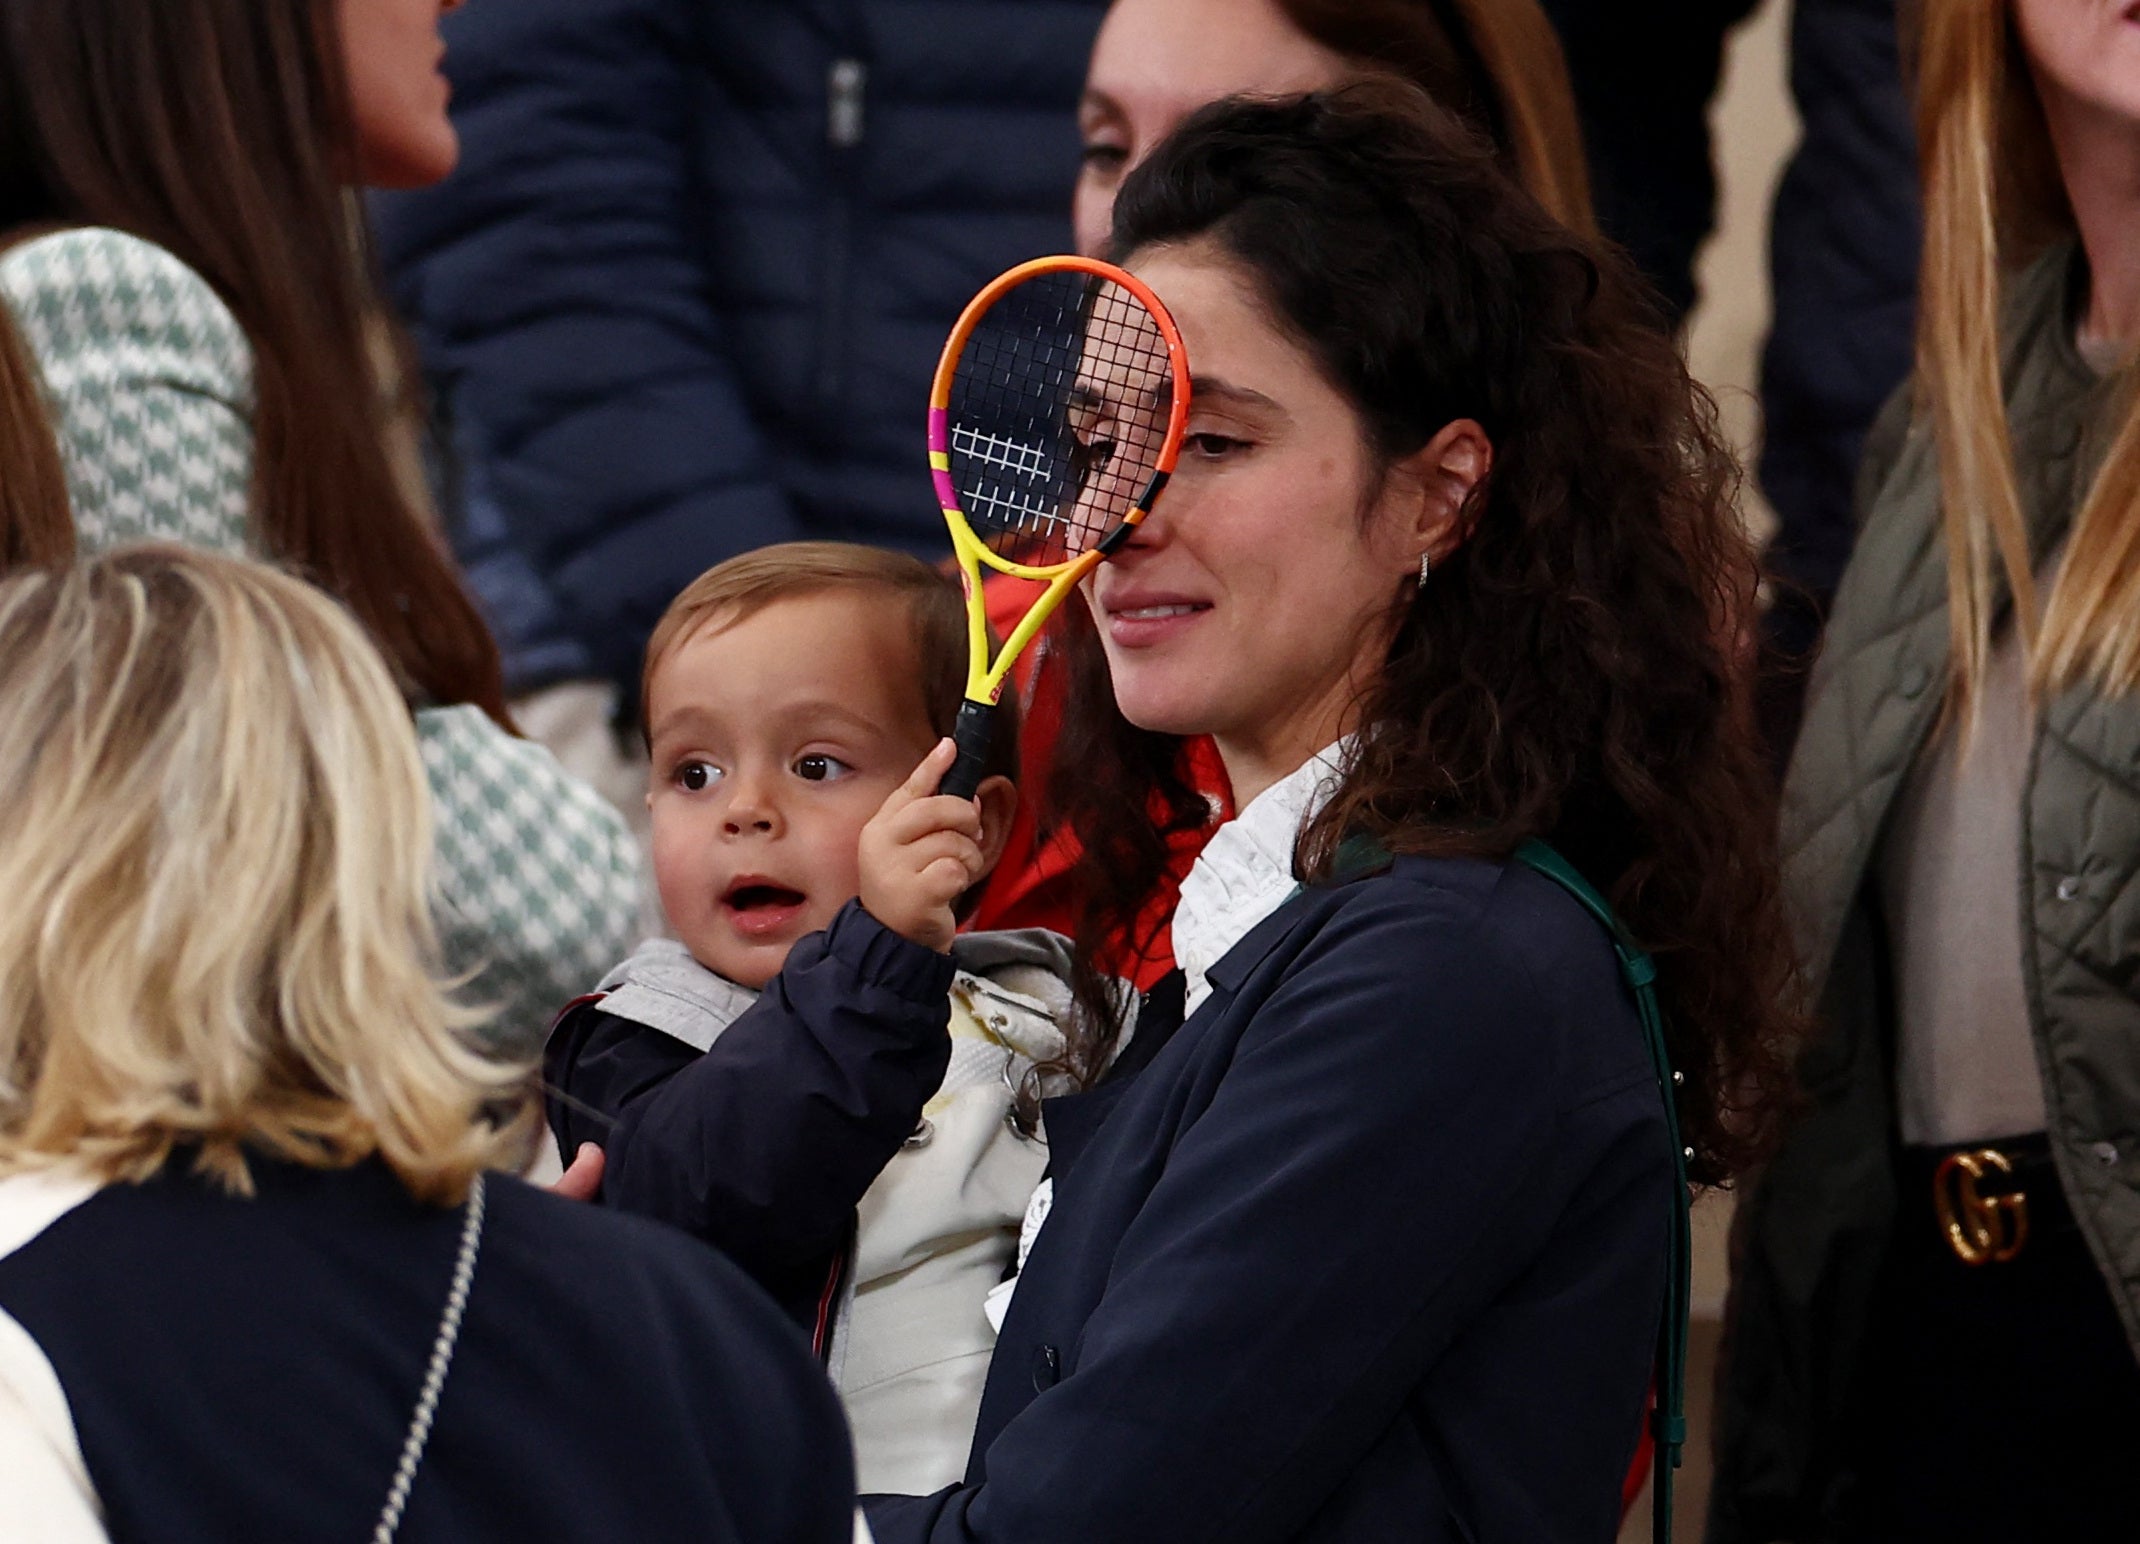 Nadal’s wife Xisca and baby son, Rafael Jr, were in attendance in Paris